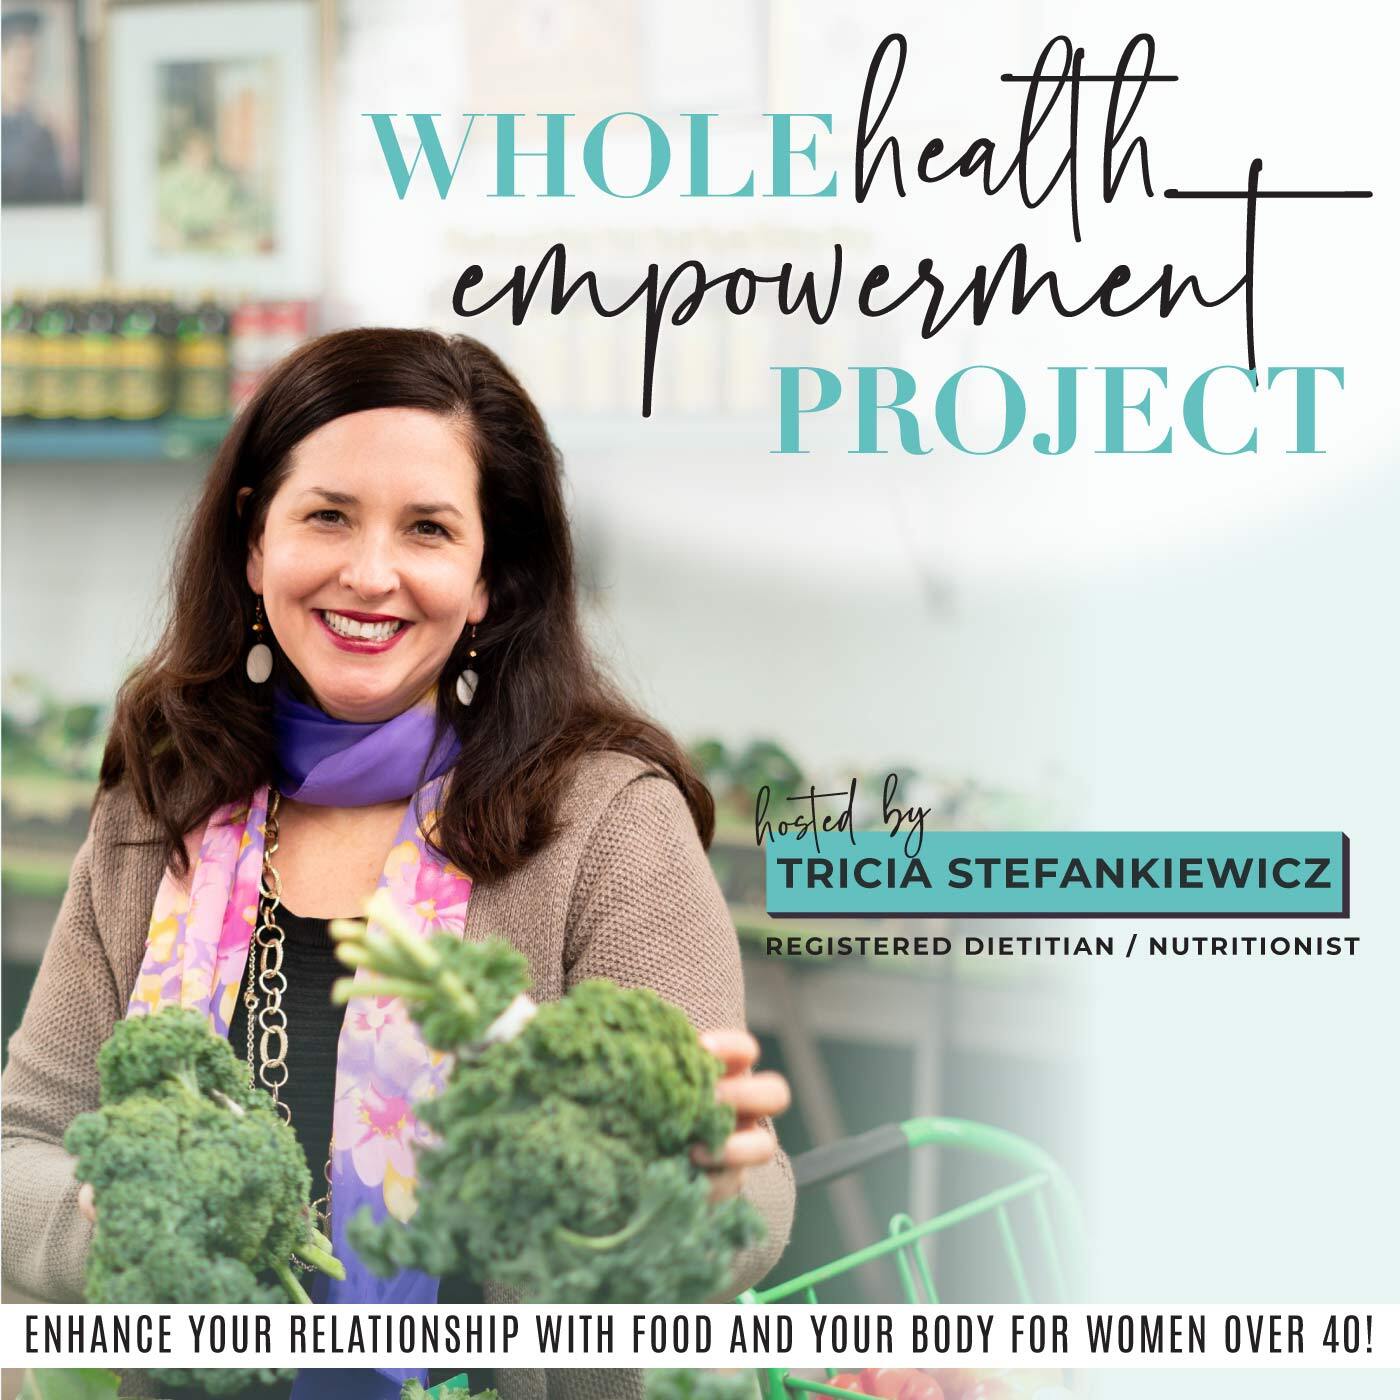 Whole Health Empowerment Project- healthy eating, weight loss after 40, weight loss motivation, food freedom, nutrition, womens health, healthy life hacks, women’s health and wellness